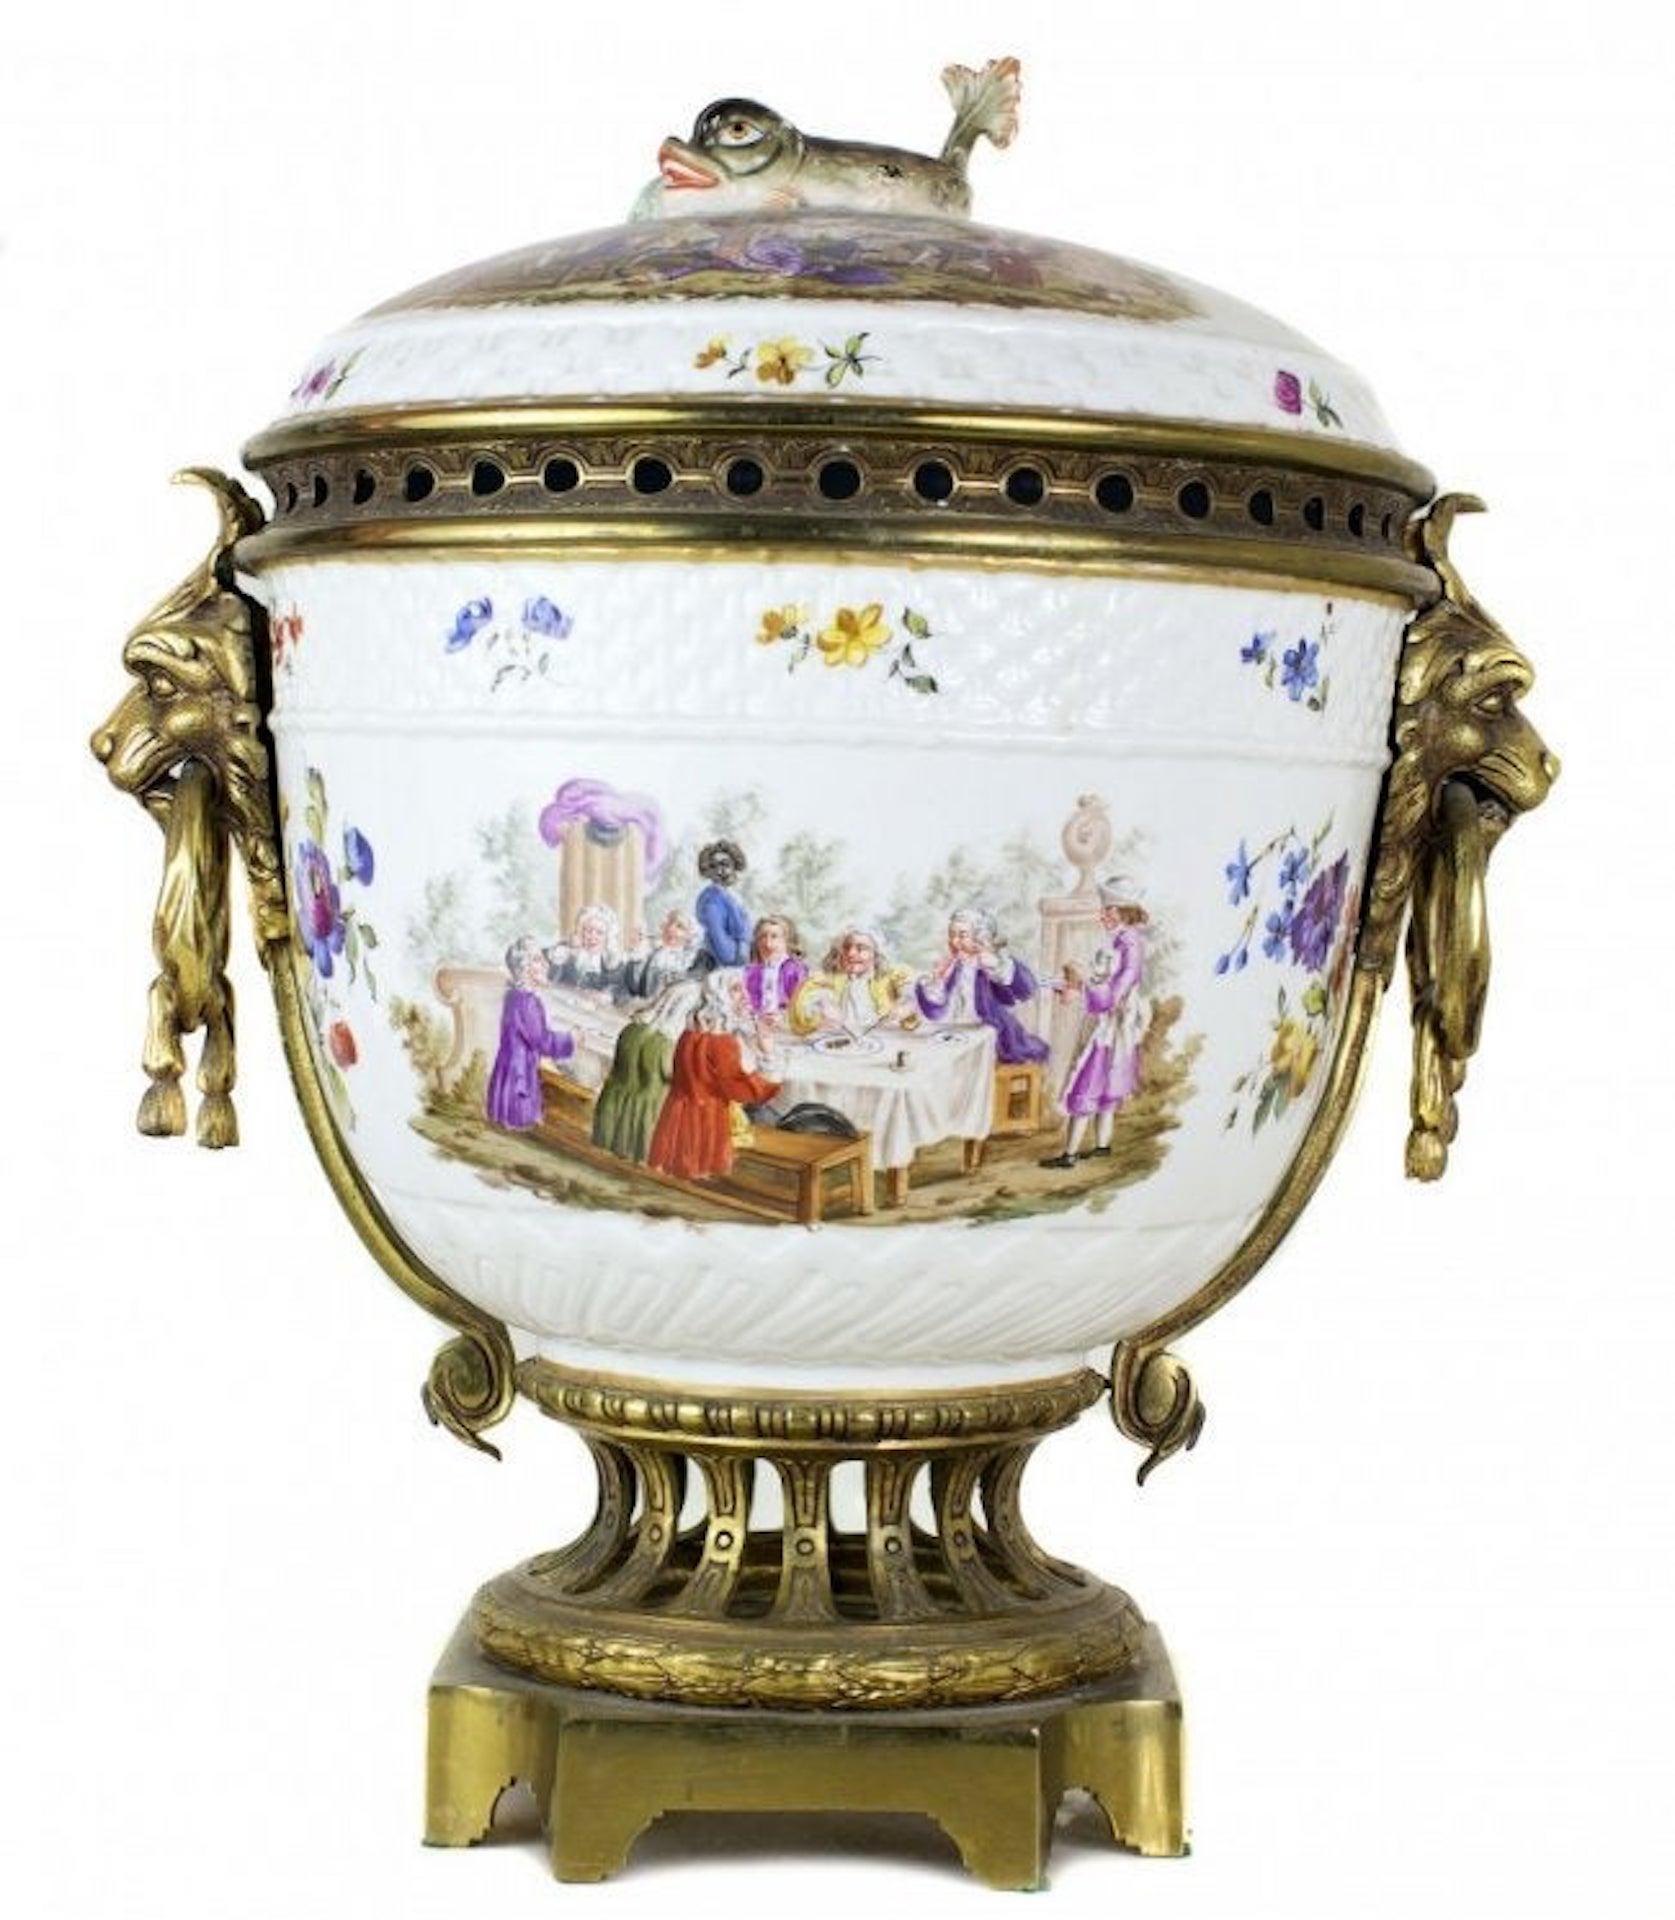 A continental gilt-bronze mounted porcelain potpourri
Late 19th century,
The large round-form body topped by a domed lid and dolphin finial, the whole painted with satiric dinner scenes, fitted with a pieced rim flanked by lion's mask and ring